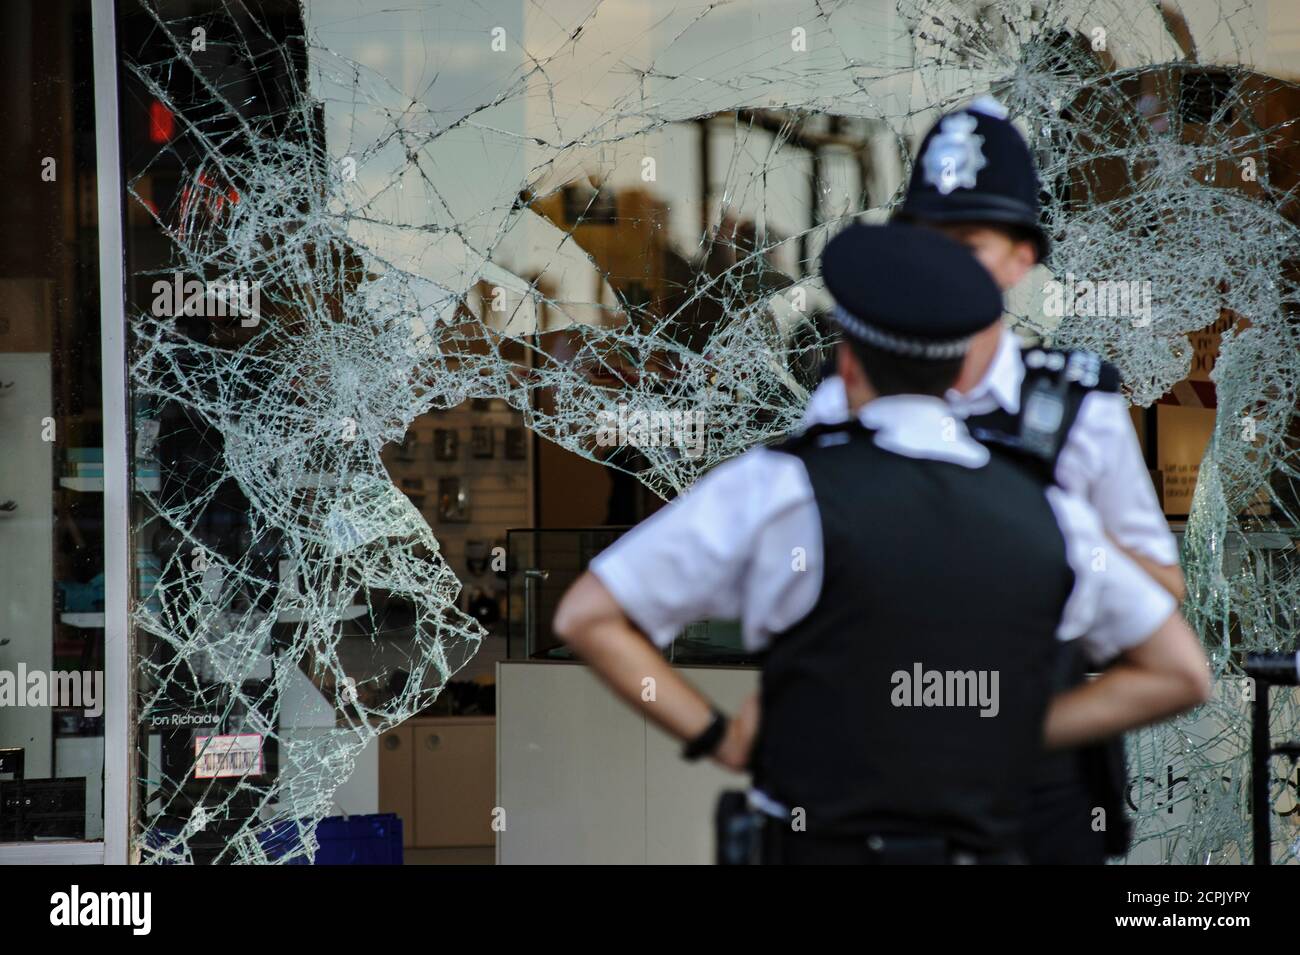 Police guard the smashed and burnt out shops and buildings after London riots Stock Photo